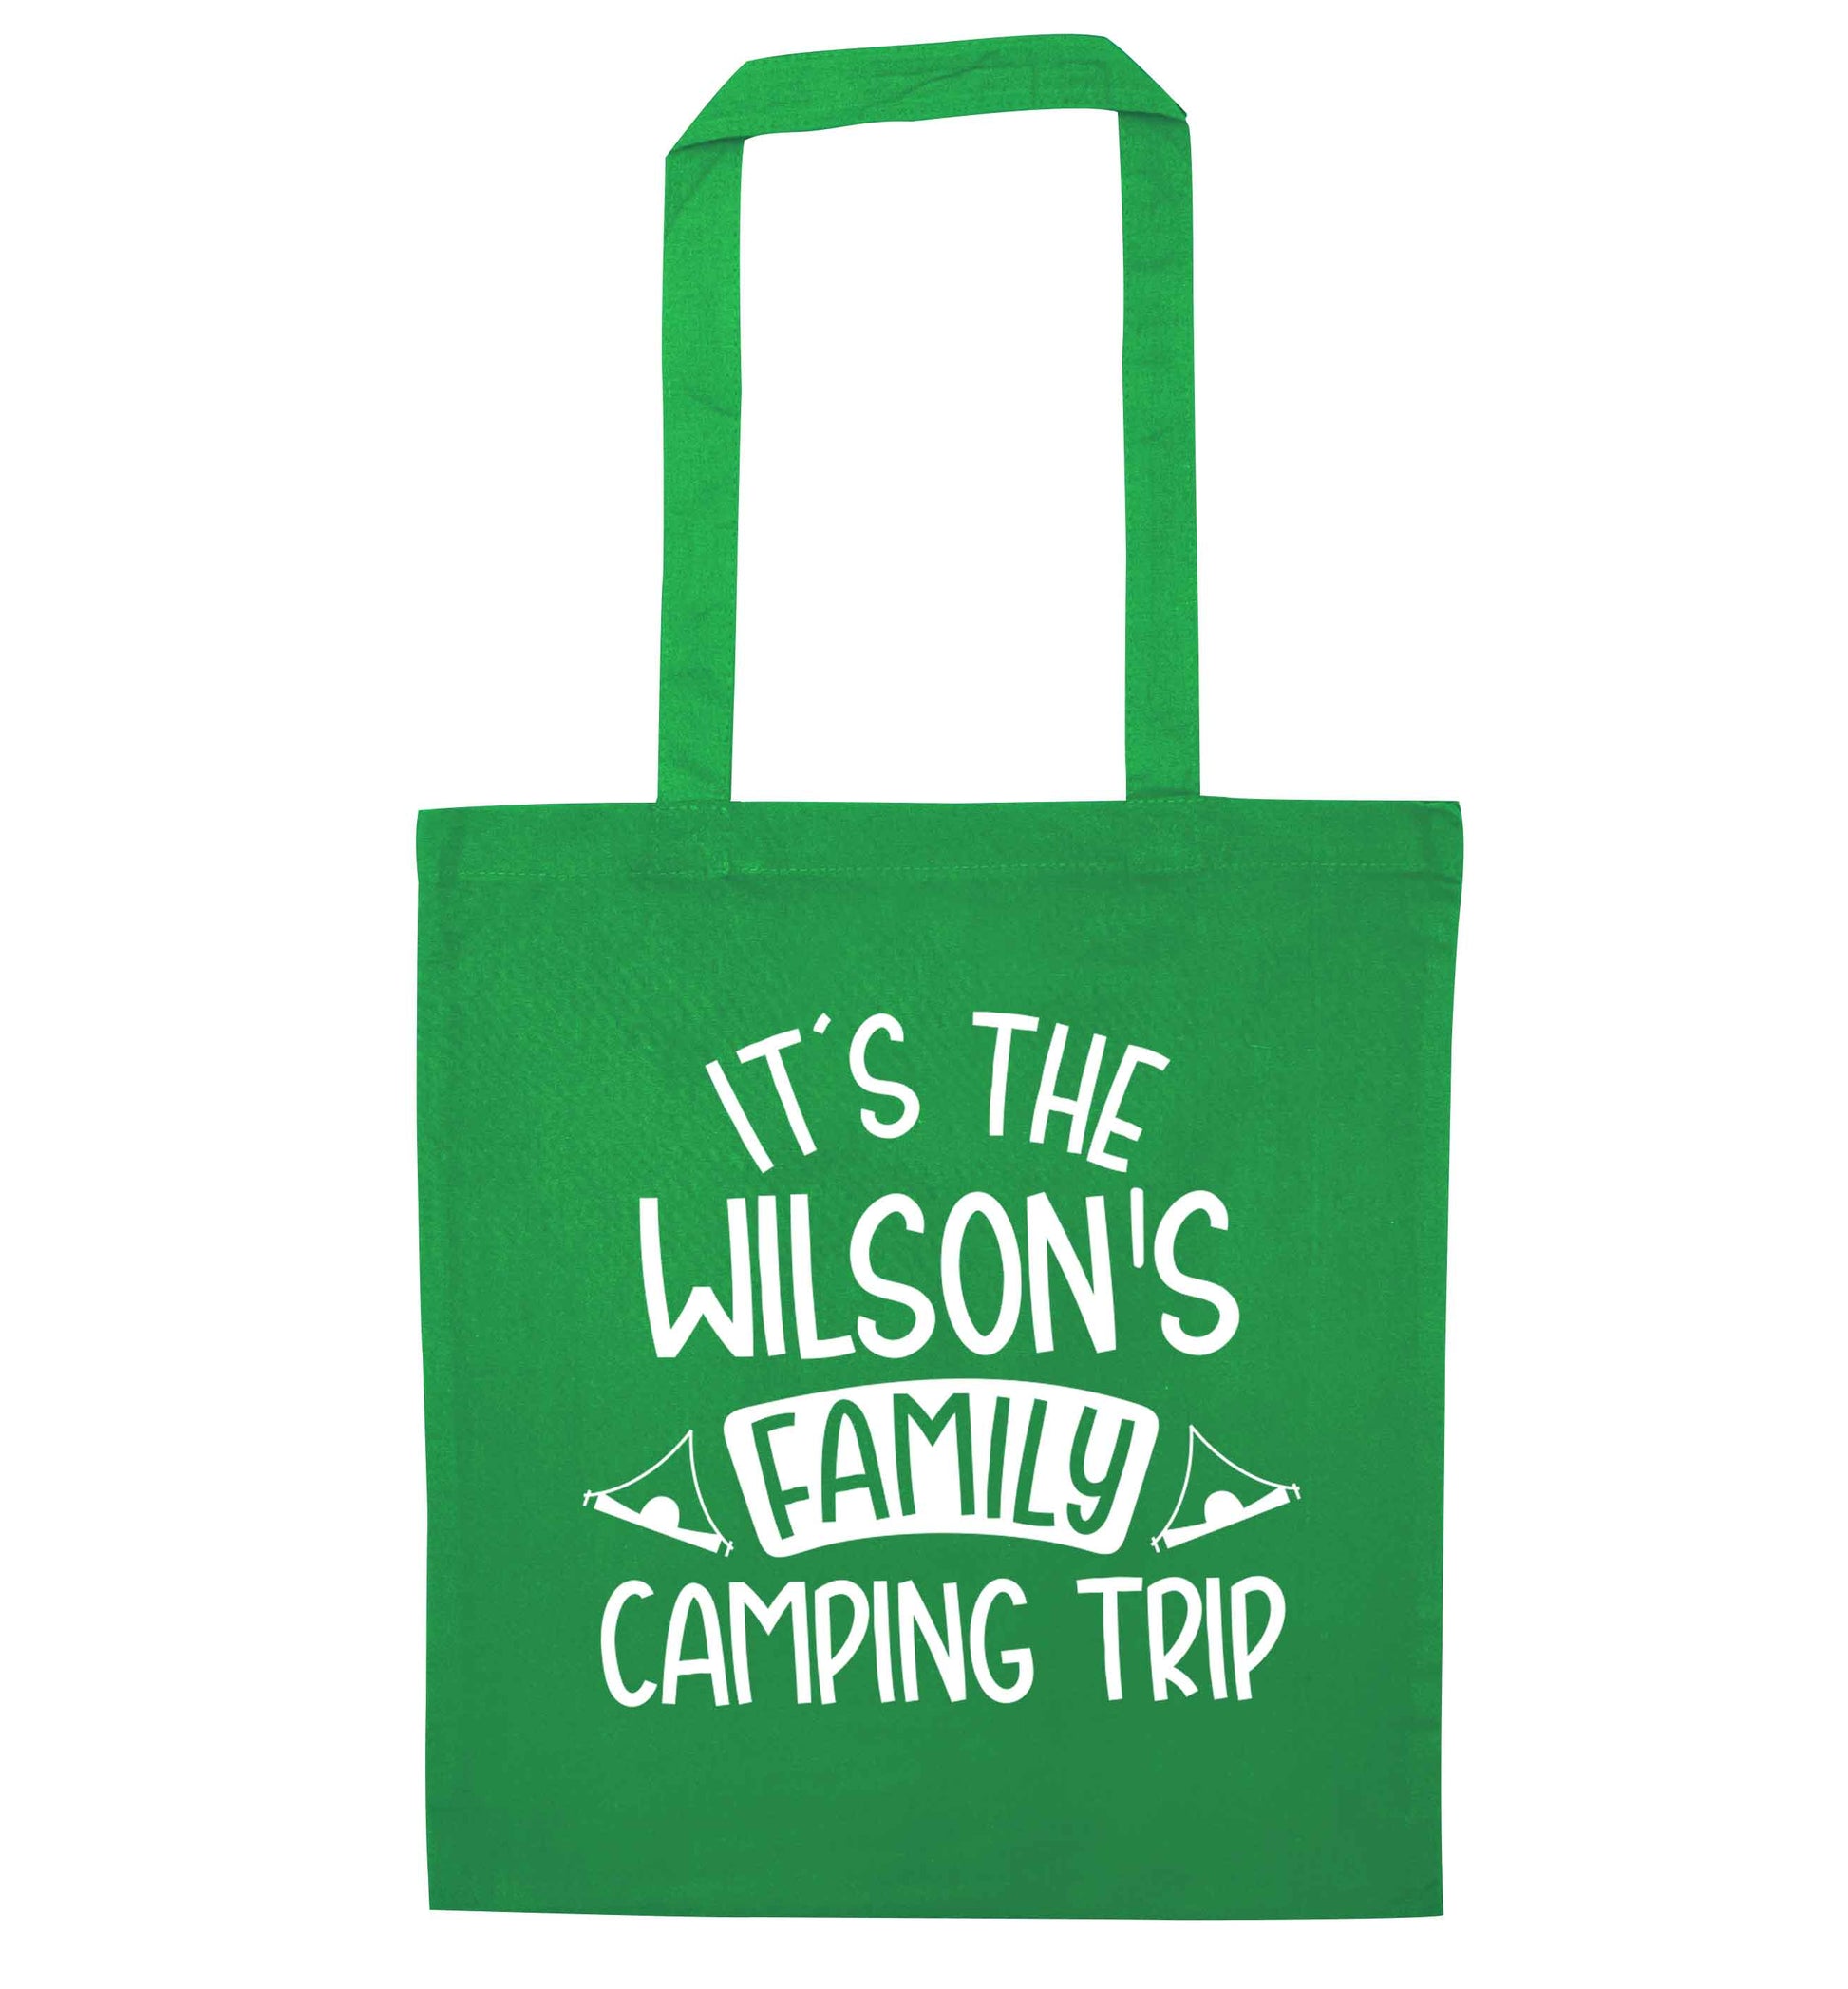 It's the Wilson's family camping trip personalised green tote bag